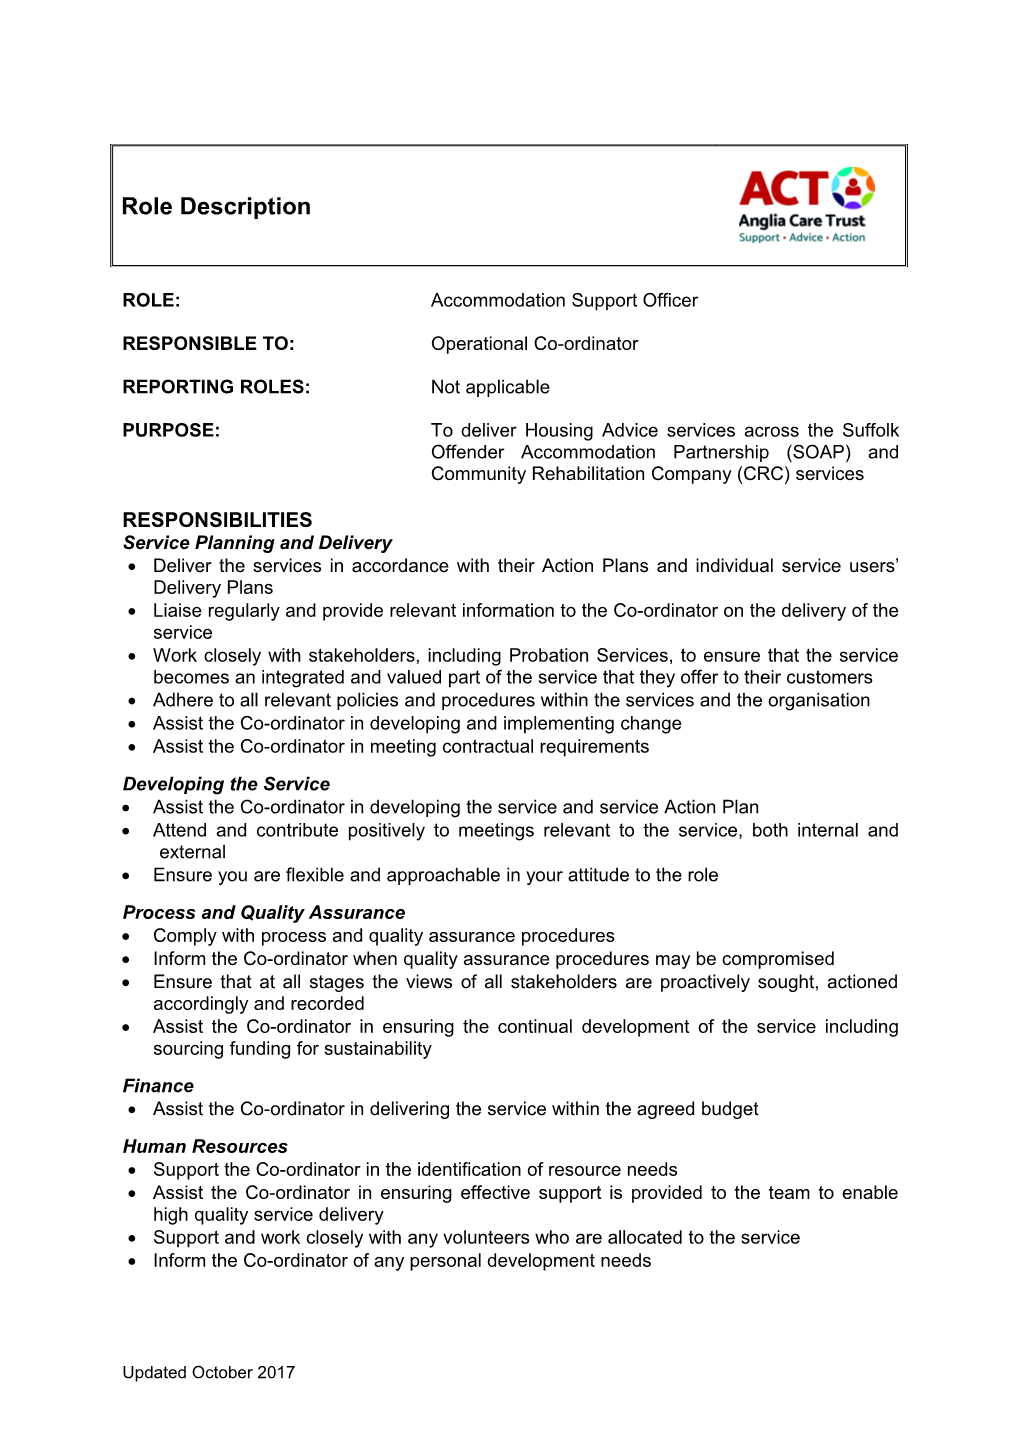 ROLE:Accommodation Support Officer